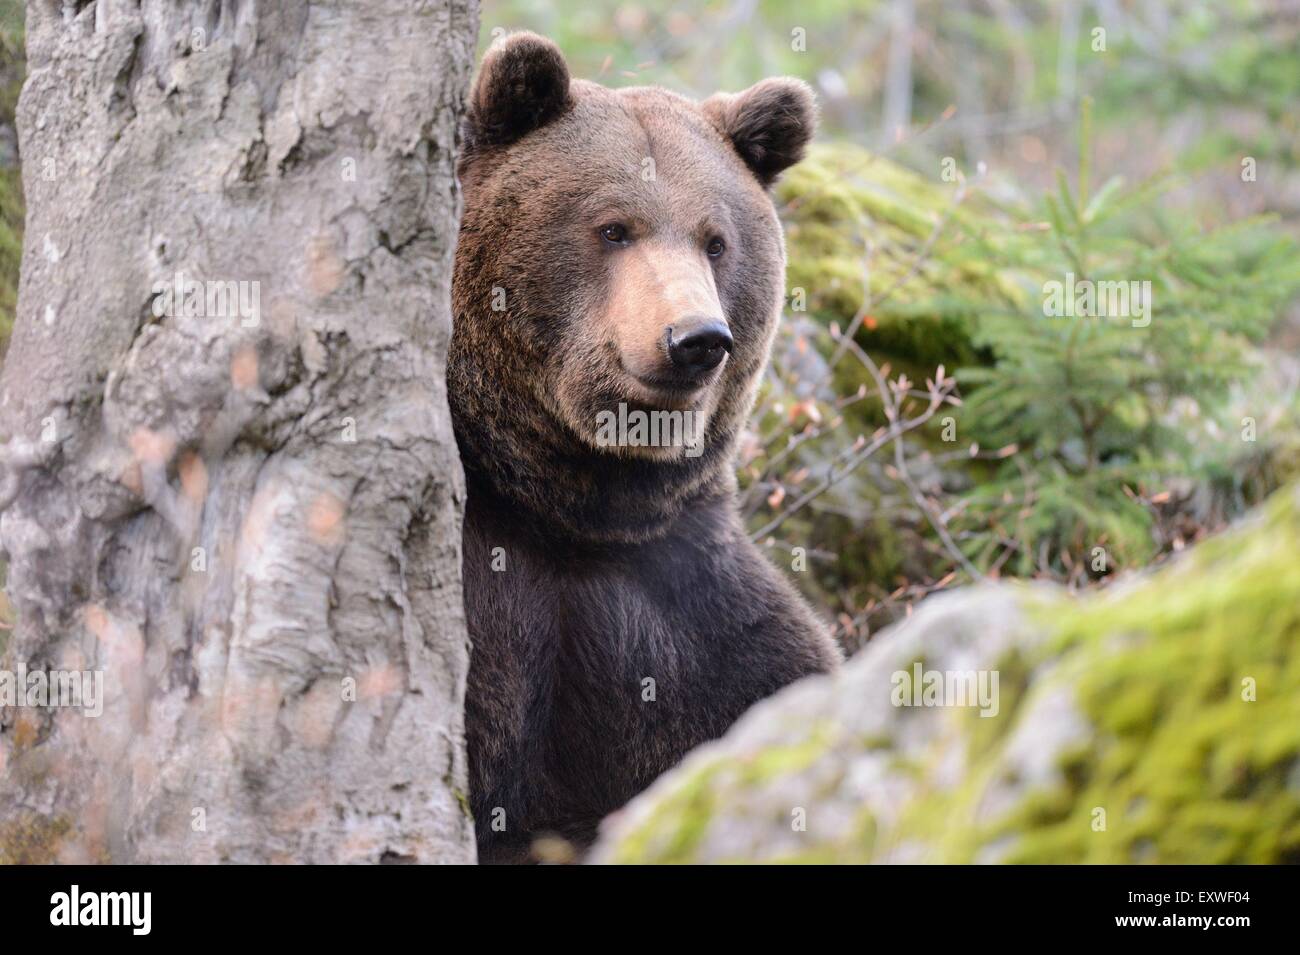 Brown bear in Bavarian Forest National Park, Germany Stock Photo